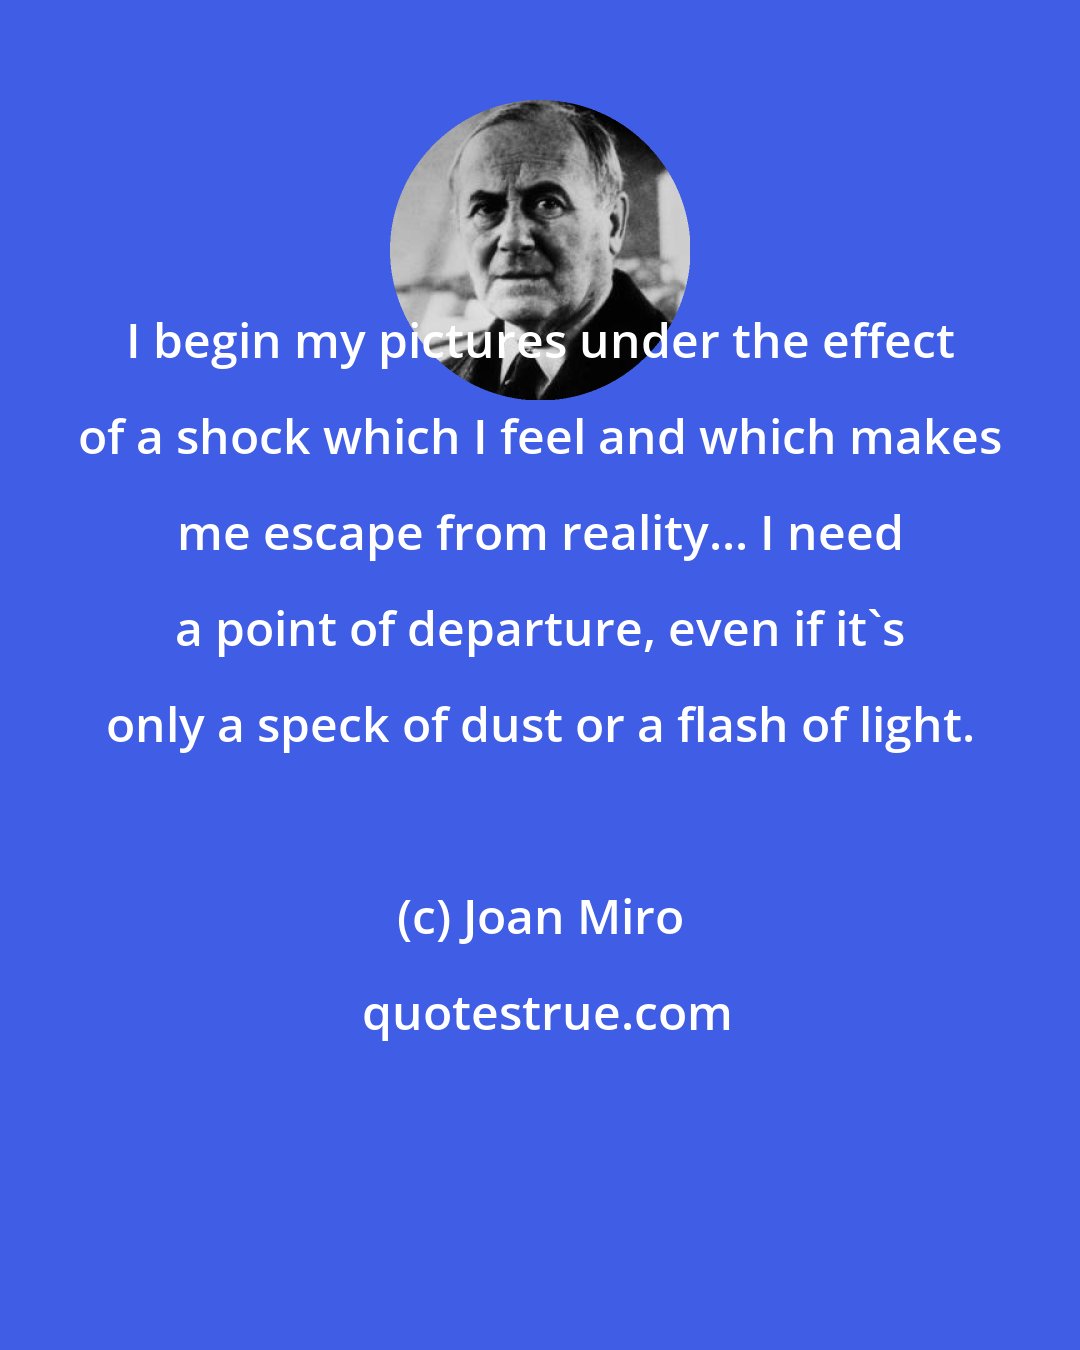 Joan Miro: I begin my pictures under the effect of a shock which I feel and which makes me escape from reality... I need a point of departure, even if it's only a speck of dust or a flash of light.